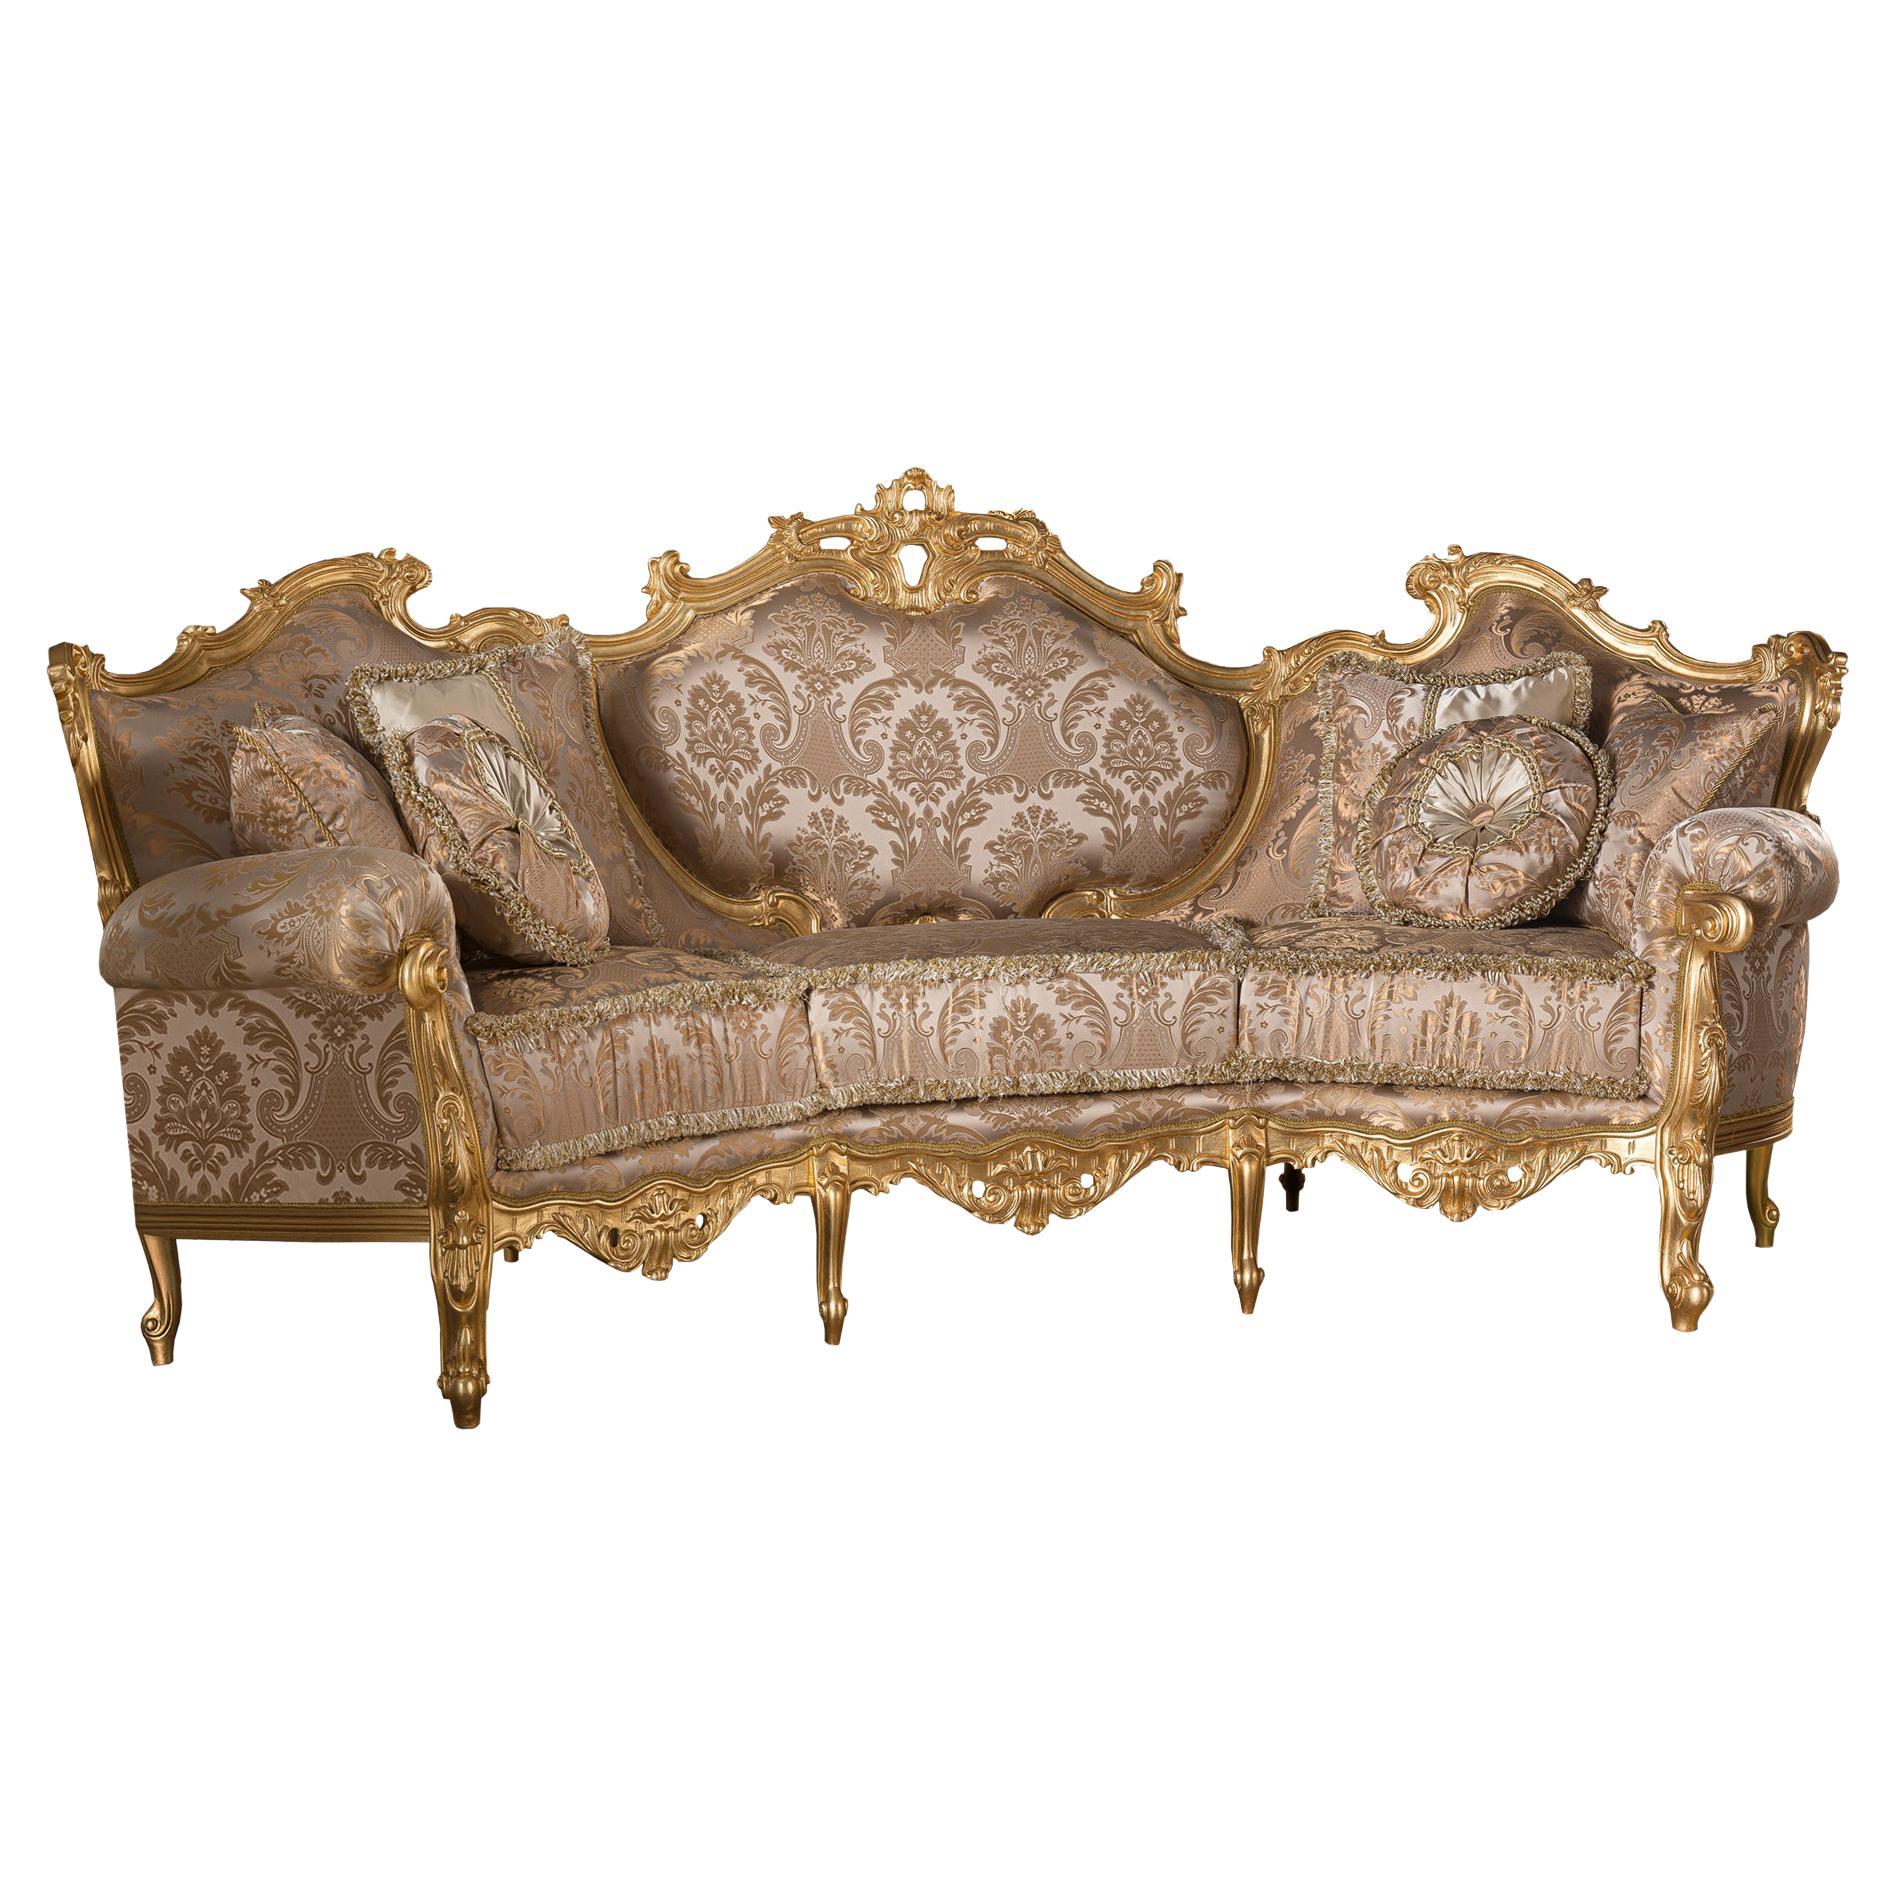 Italian Three-Seat Deluxe Sofa in Top Quality Massive Wood with Gold Leaf Decor For Sale